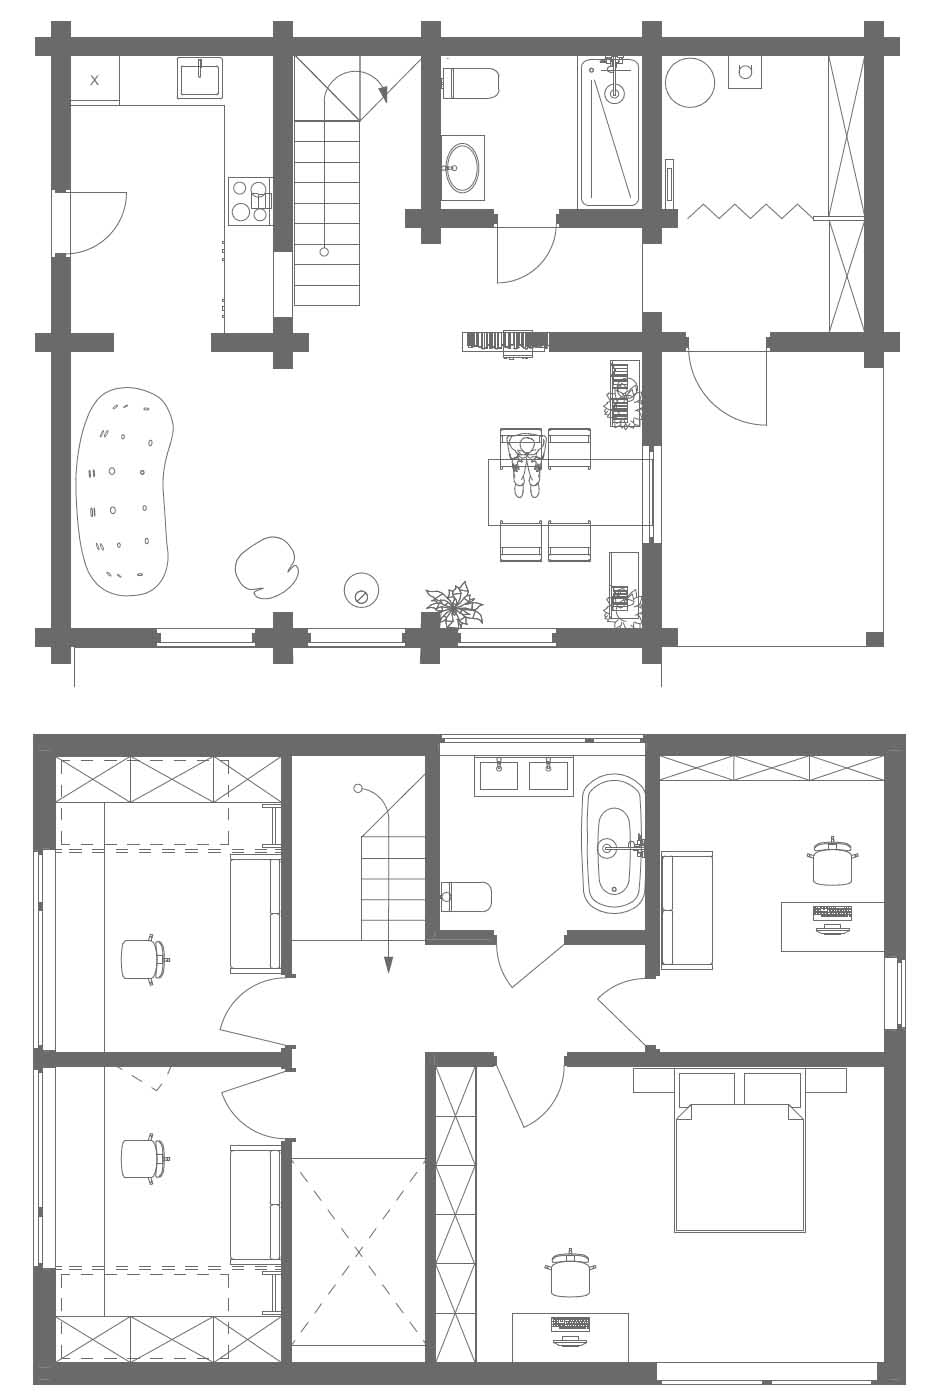 The floor plan of a modern two-storey home.